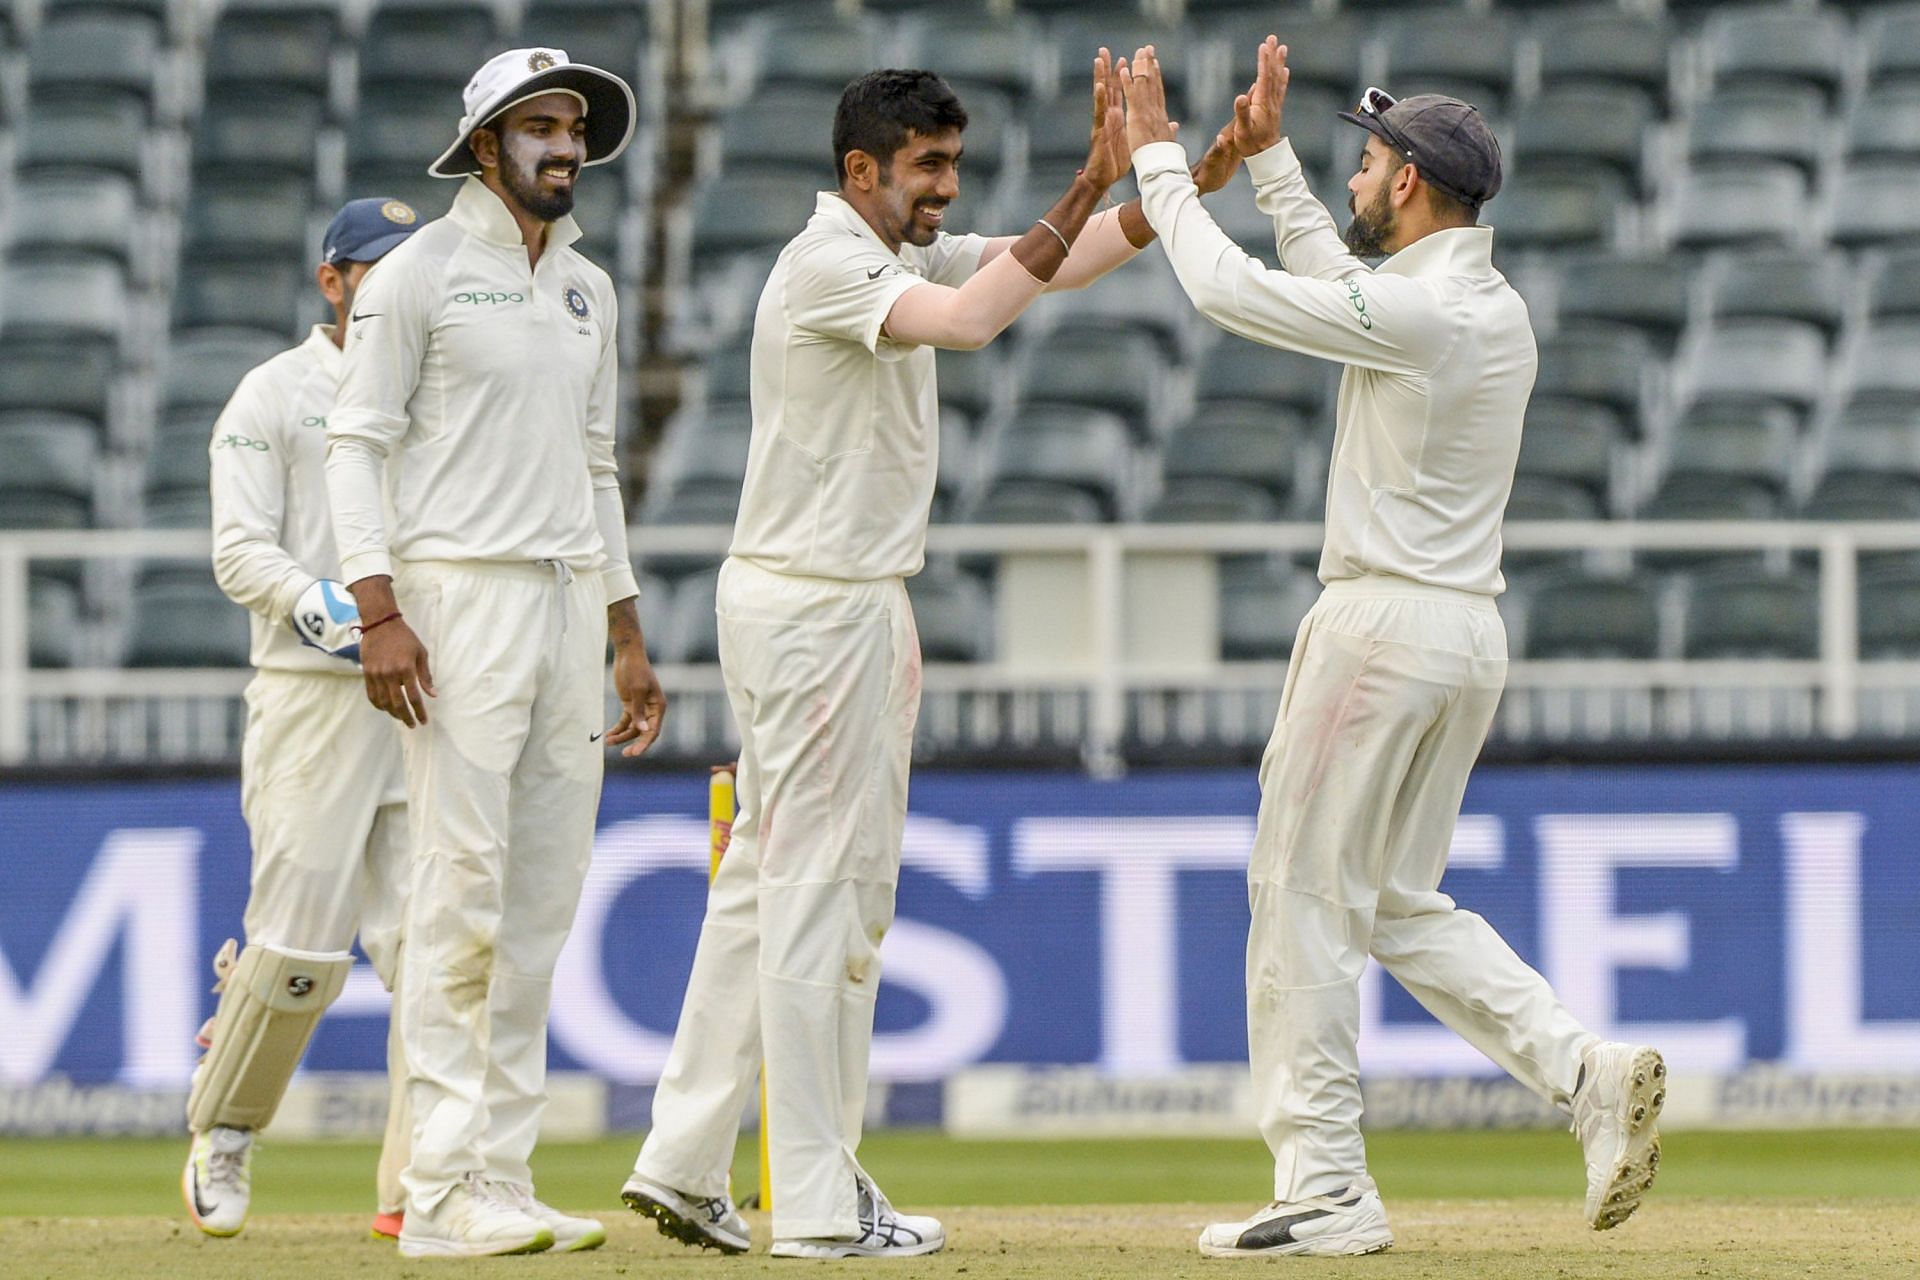 3rd Sunfoil Test: South Africa v India, Day 2